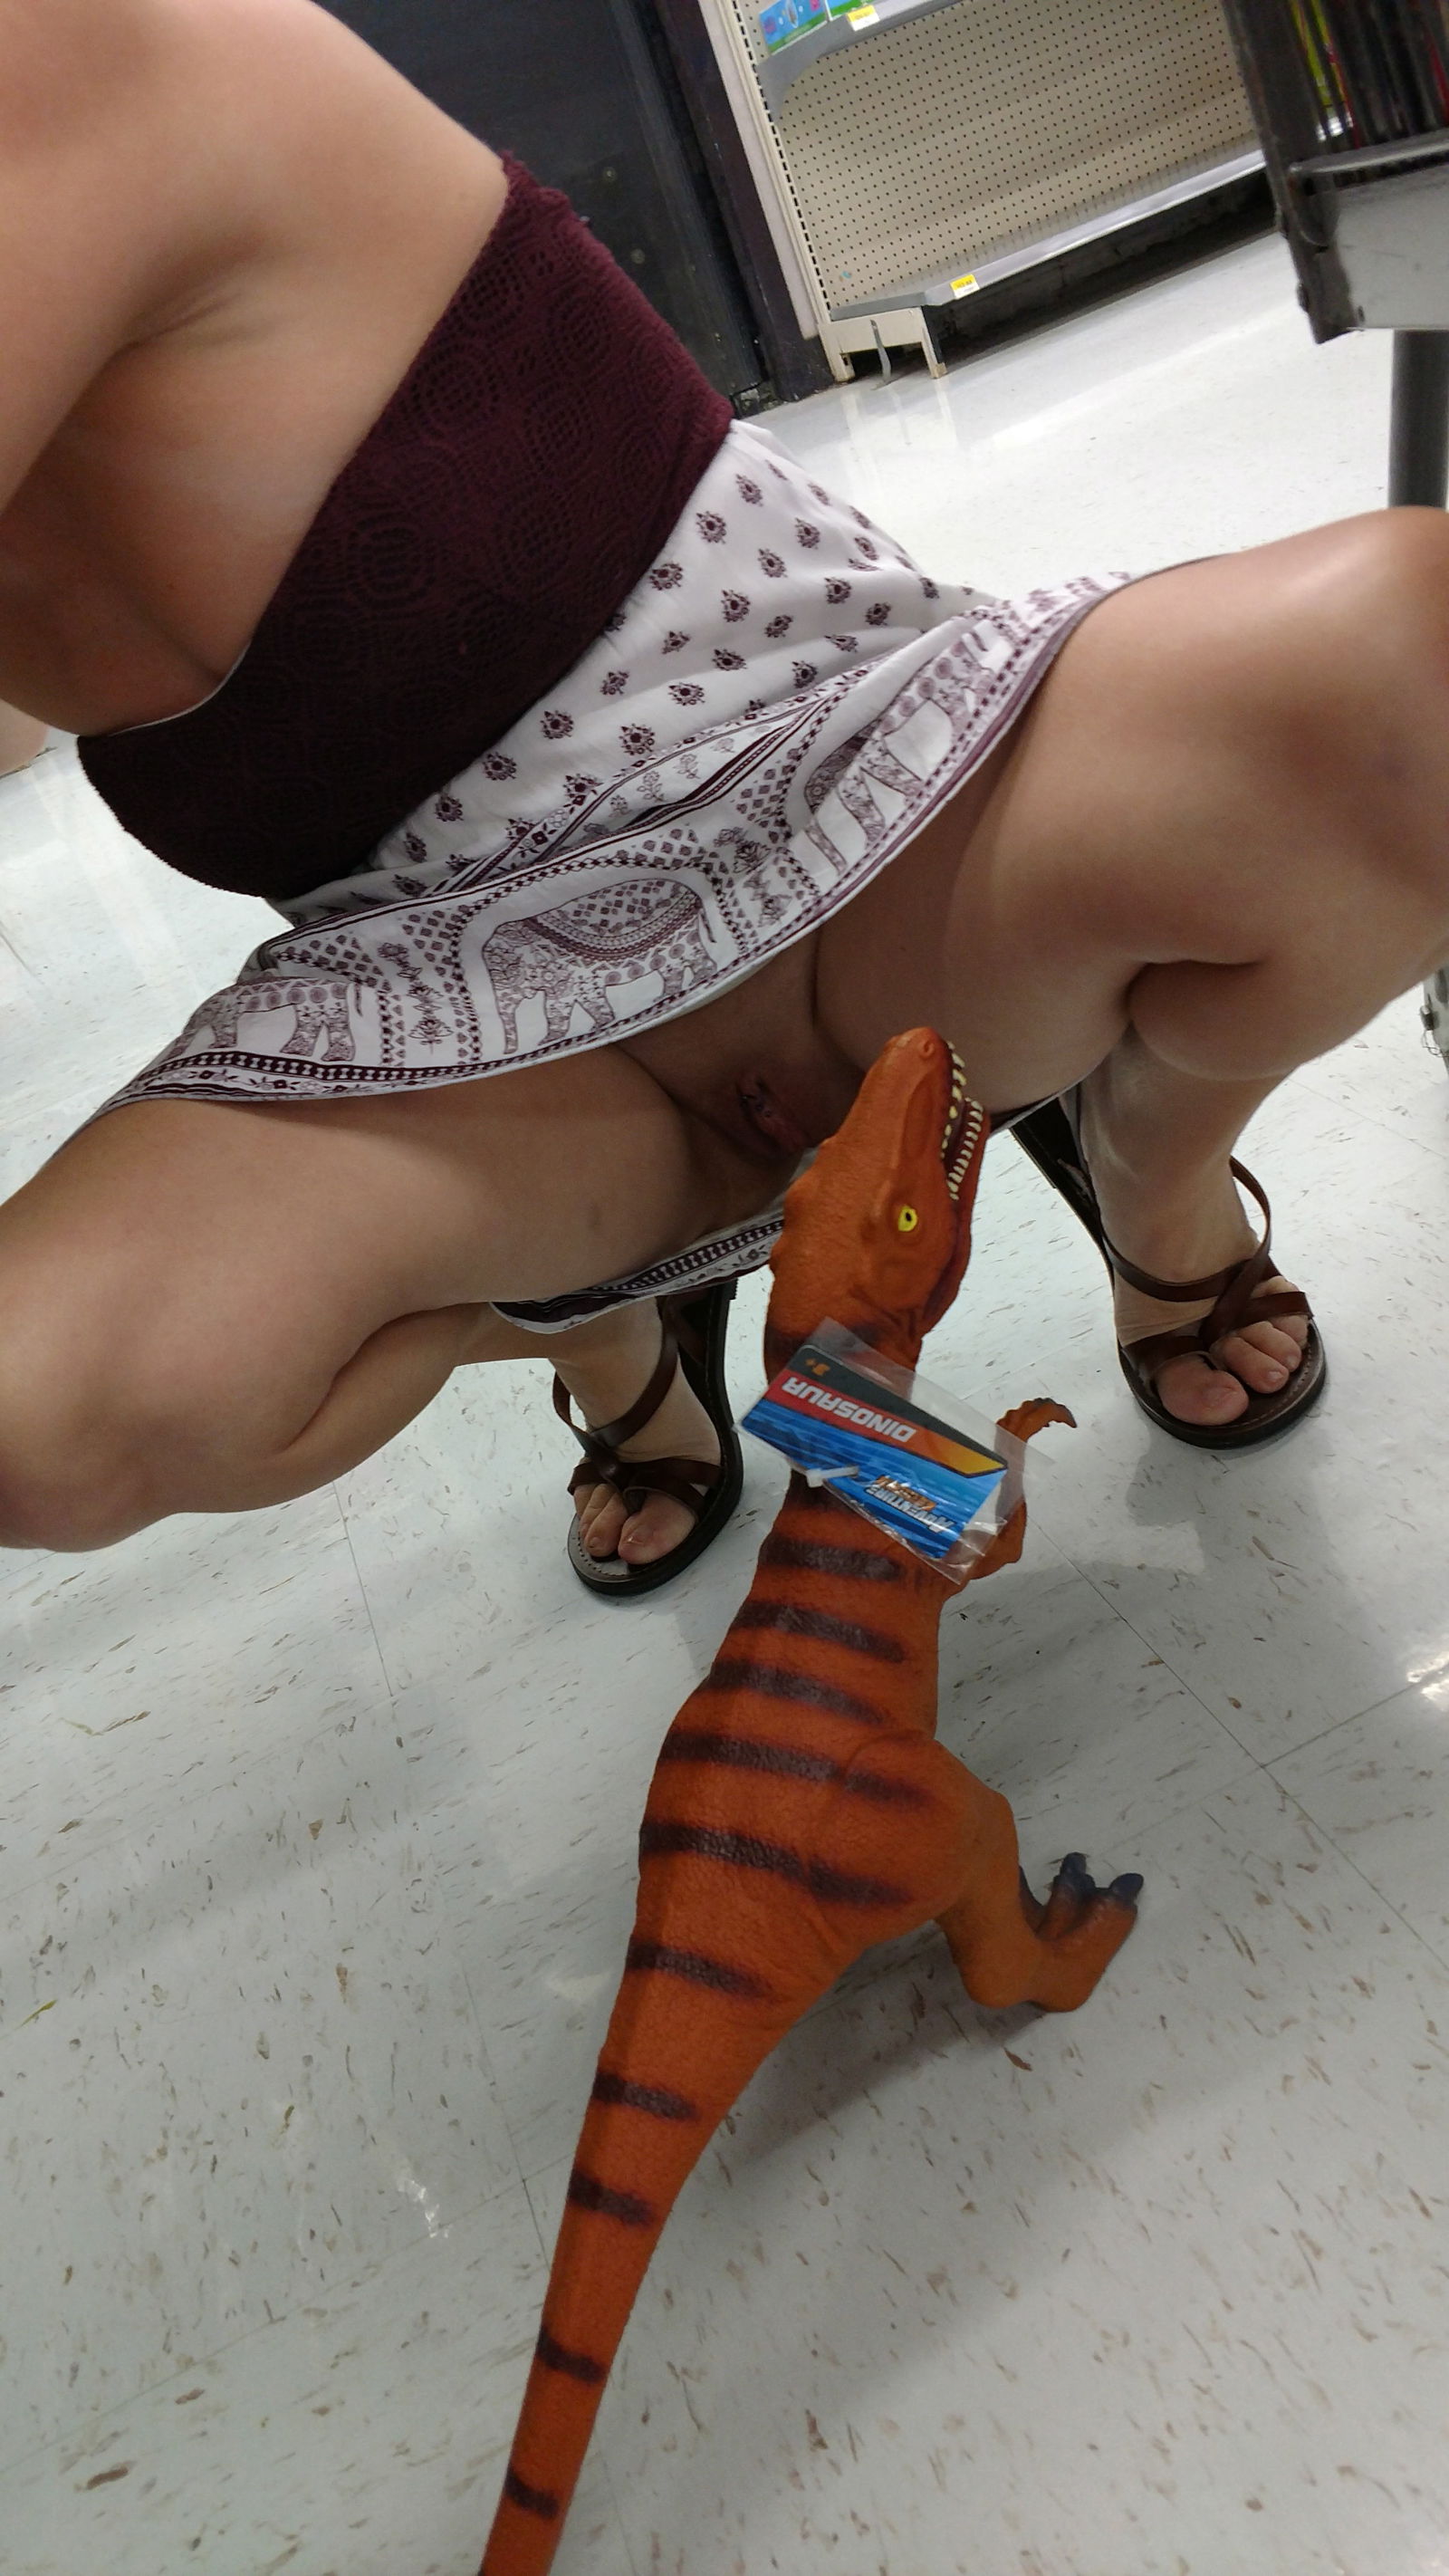 Watch the Photo by Lookingfor39 with the username @Lookingfor39, posted on May 17, 2019. The post is about the topic Flashers and Public Nudes. and the text says 'Hmm even t-rex knows what good to eat 
Babygurl 😍 😘'